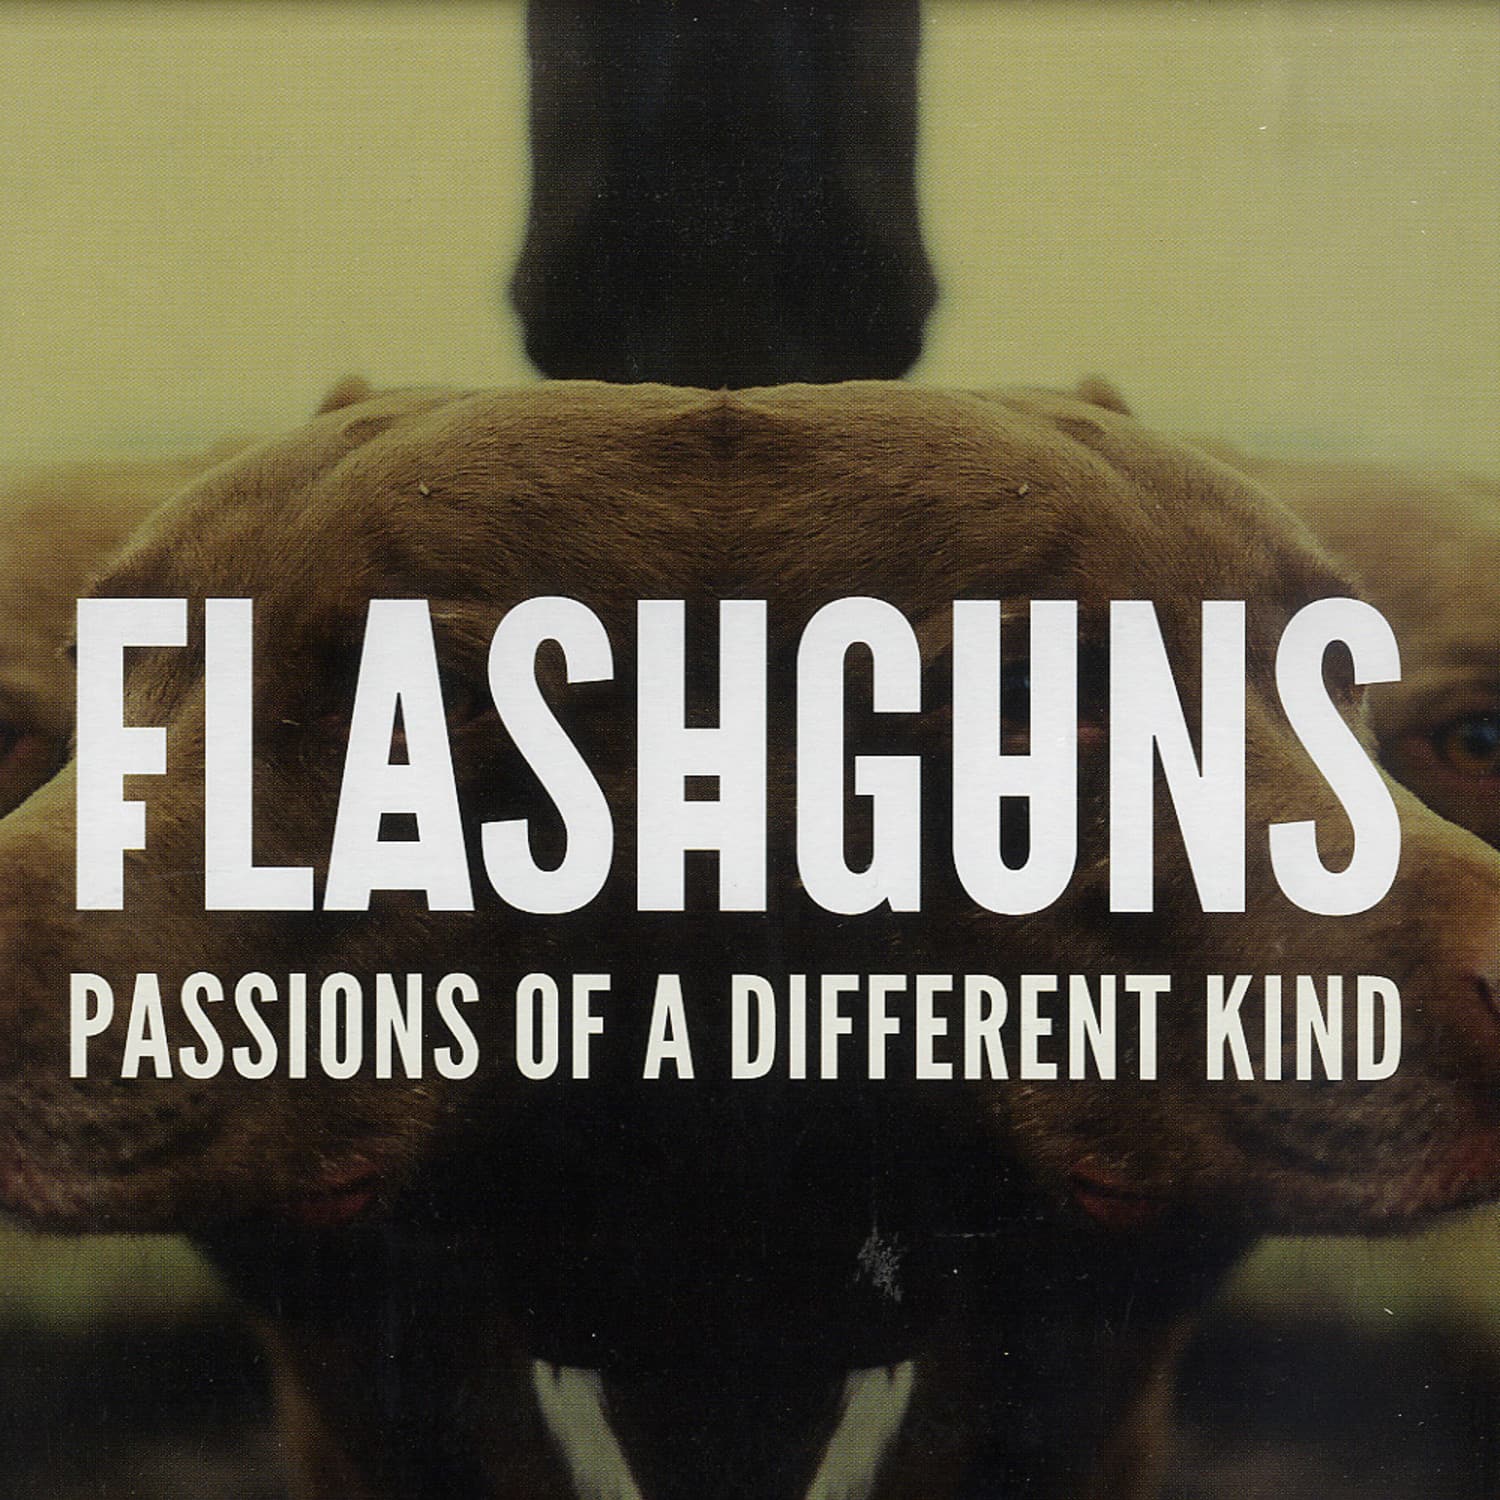 Flashguns - PASSIONS OF A DIFFERENT KIND 